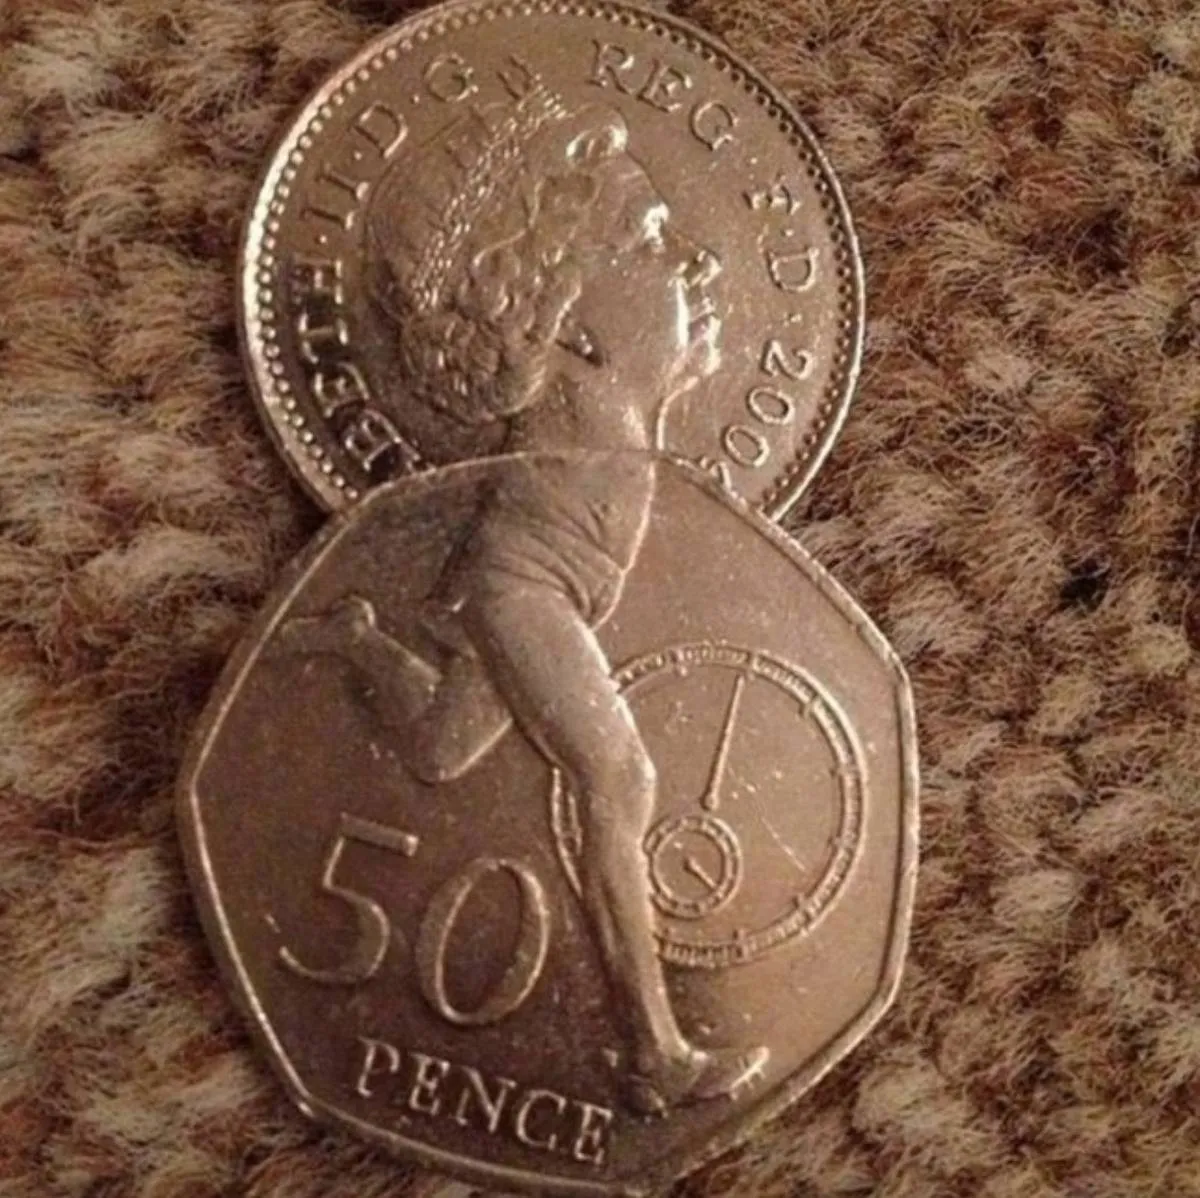 Overlapping british coins make the queen looks like she's just a head, neck and legs